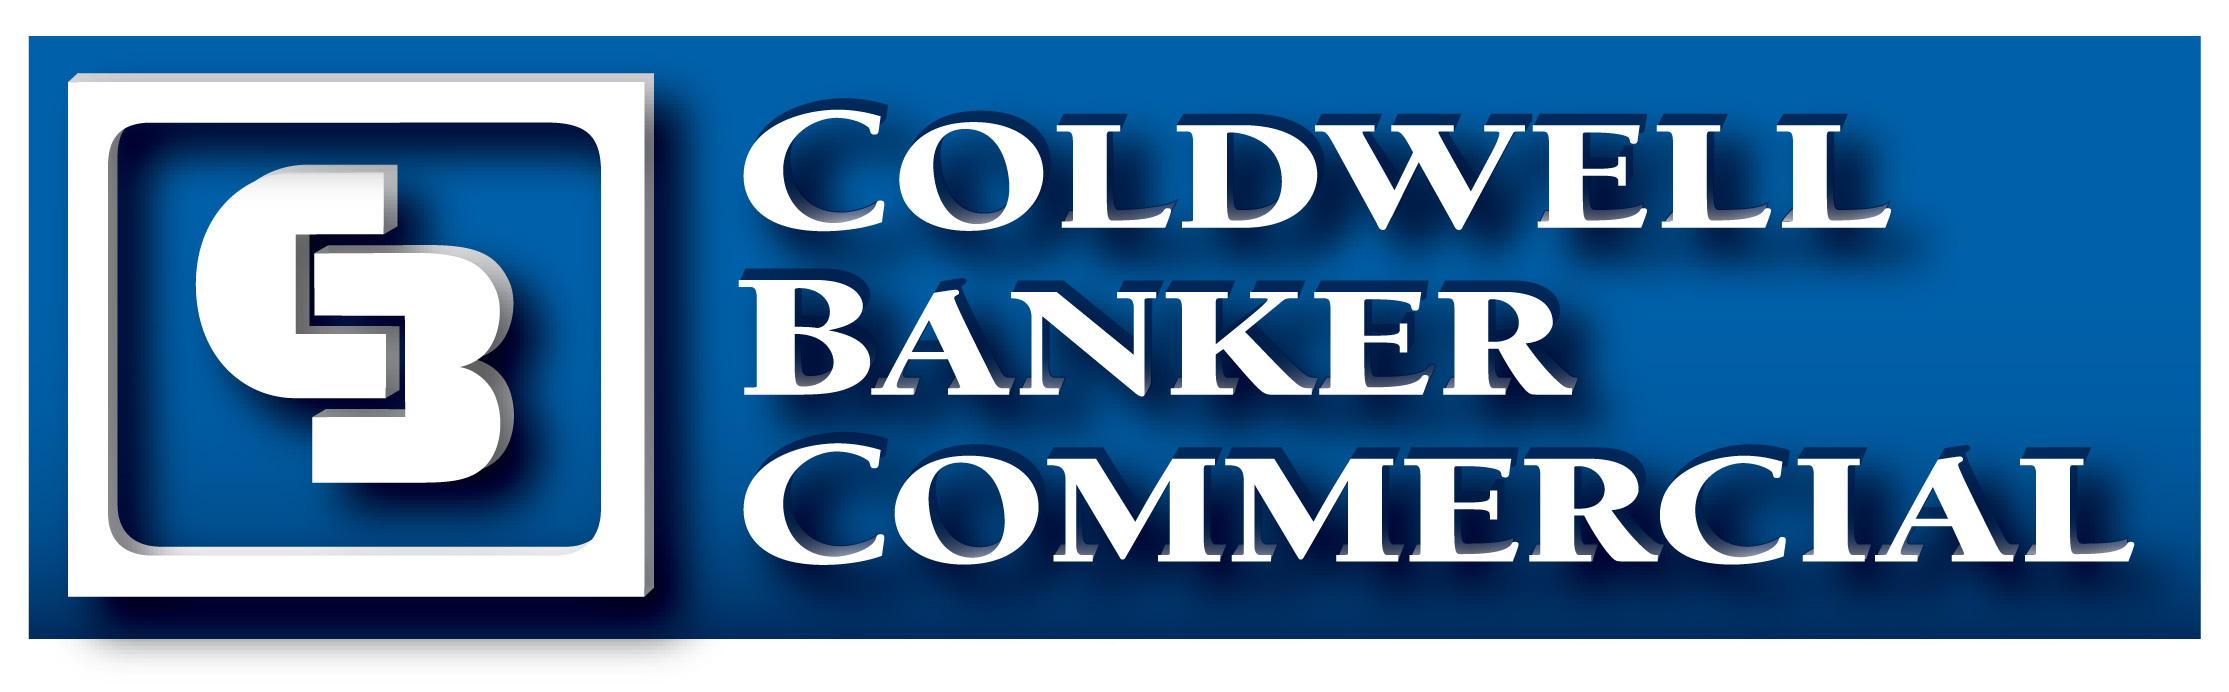 Coldwell Banker Commercial Logo photo - 1